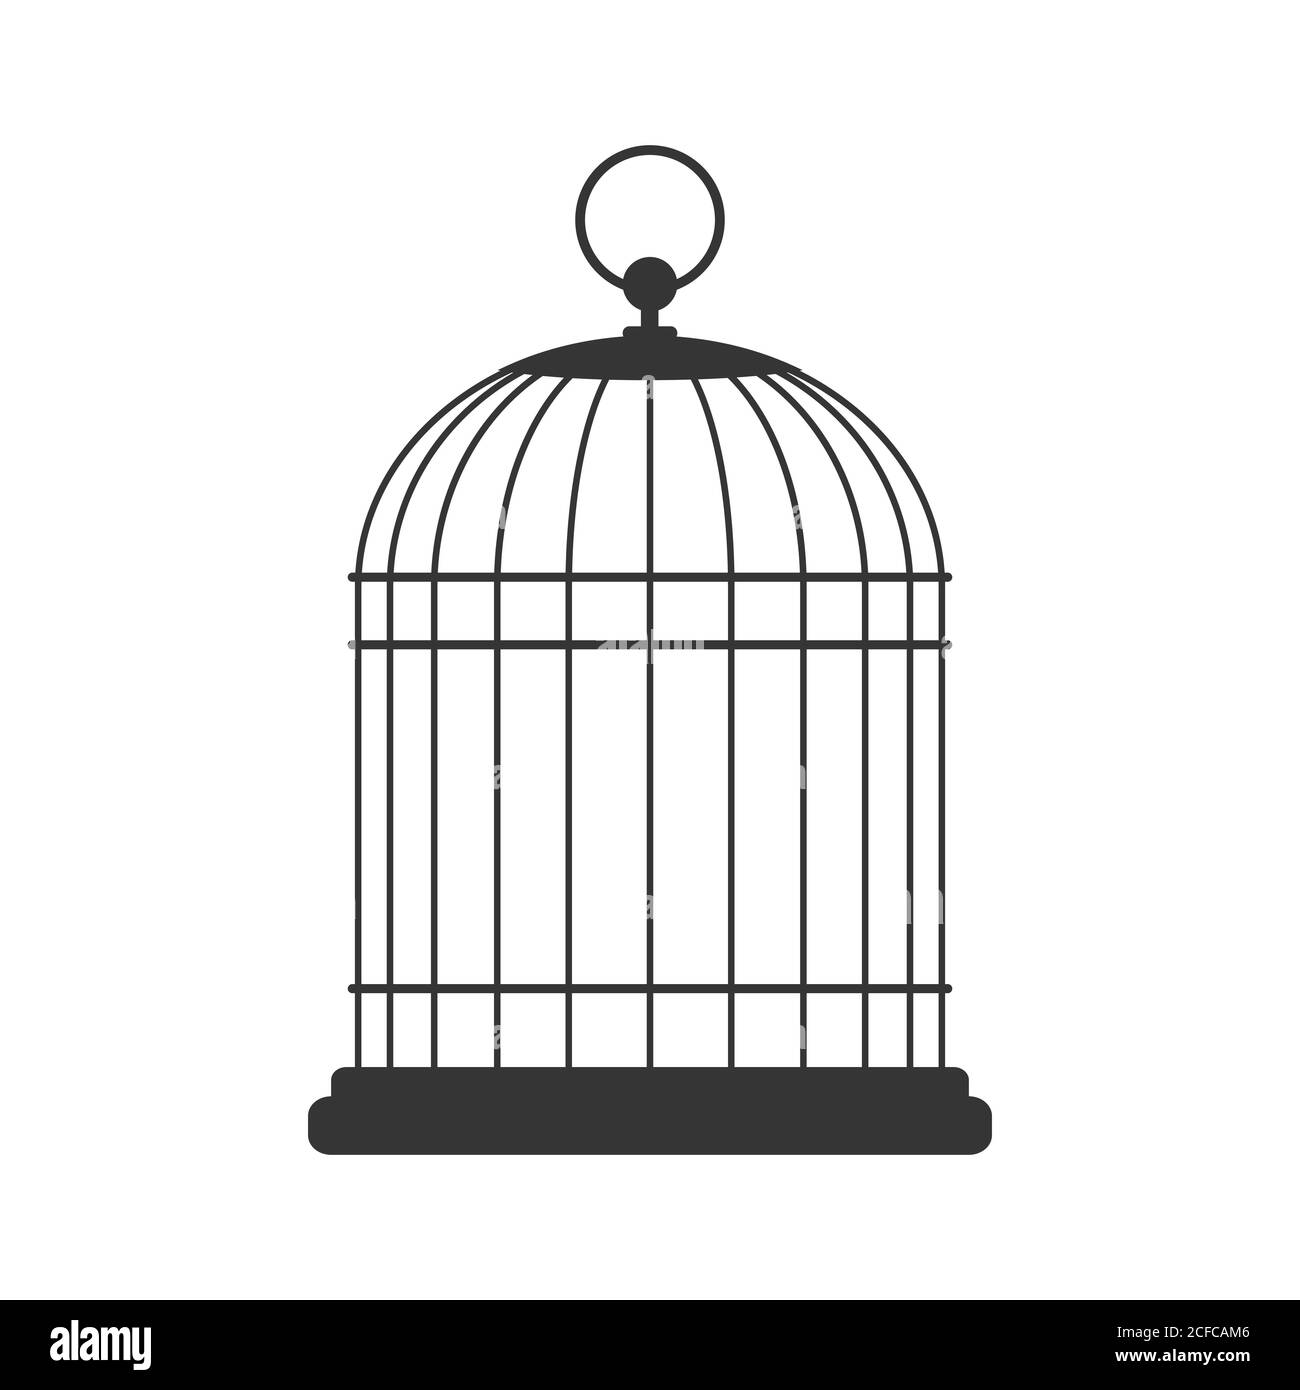 Bird cage illustration Cut Out Stock Images & Pictures - Alamy